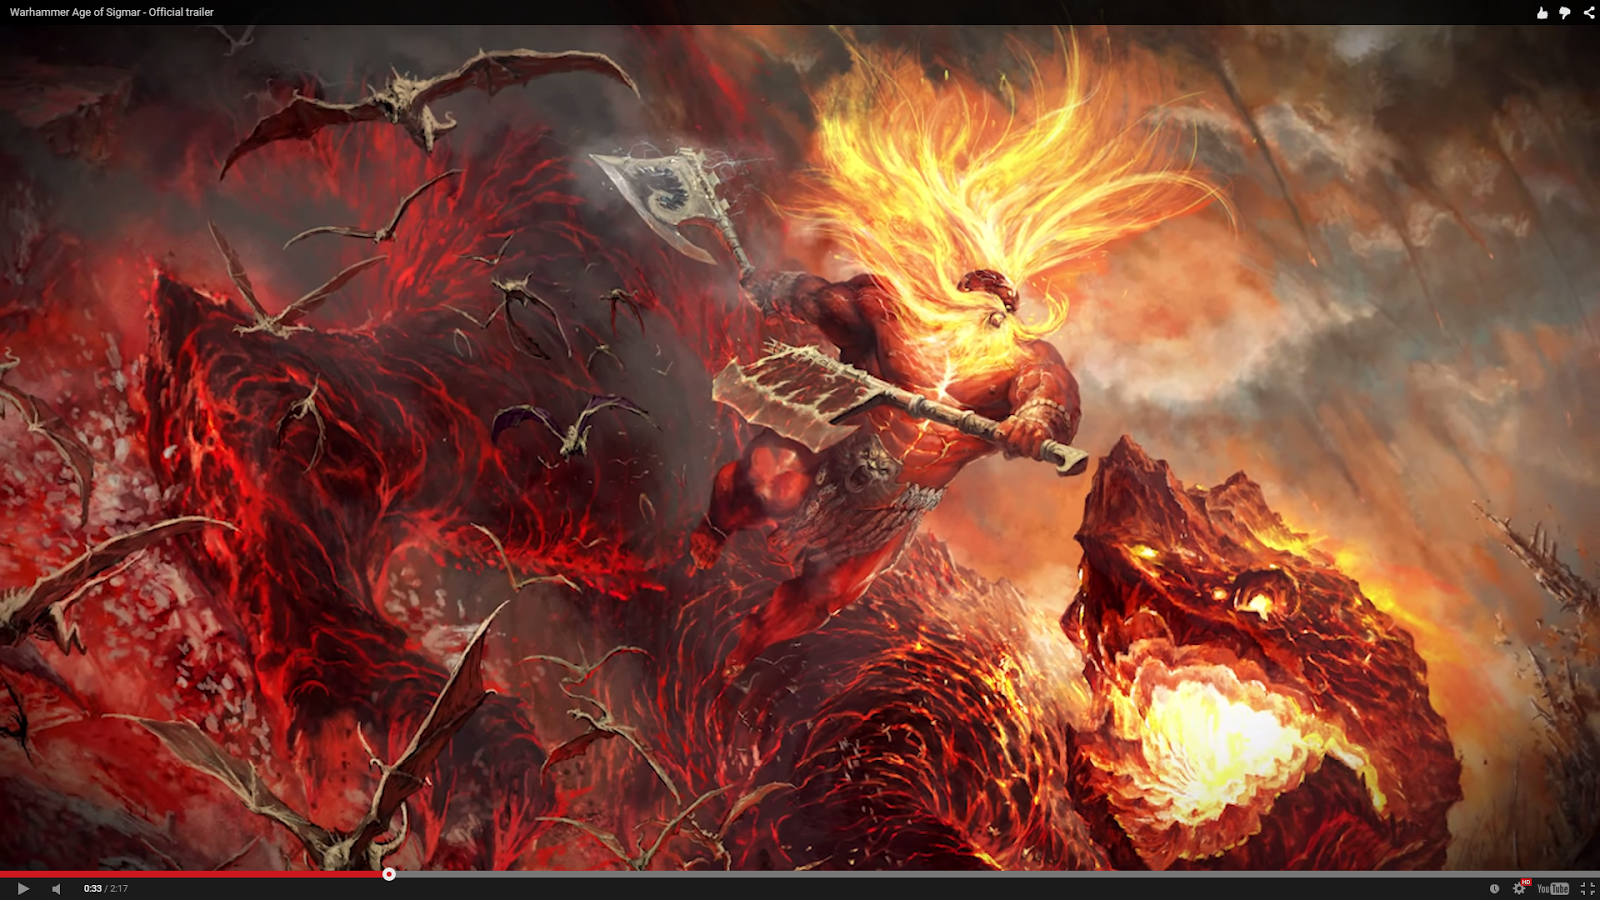 age of sigmar wallpaper,cg artwork,action adventure game,demon,geological phenomenon,fictional character